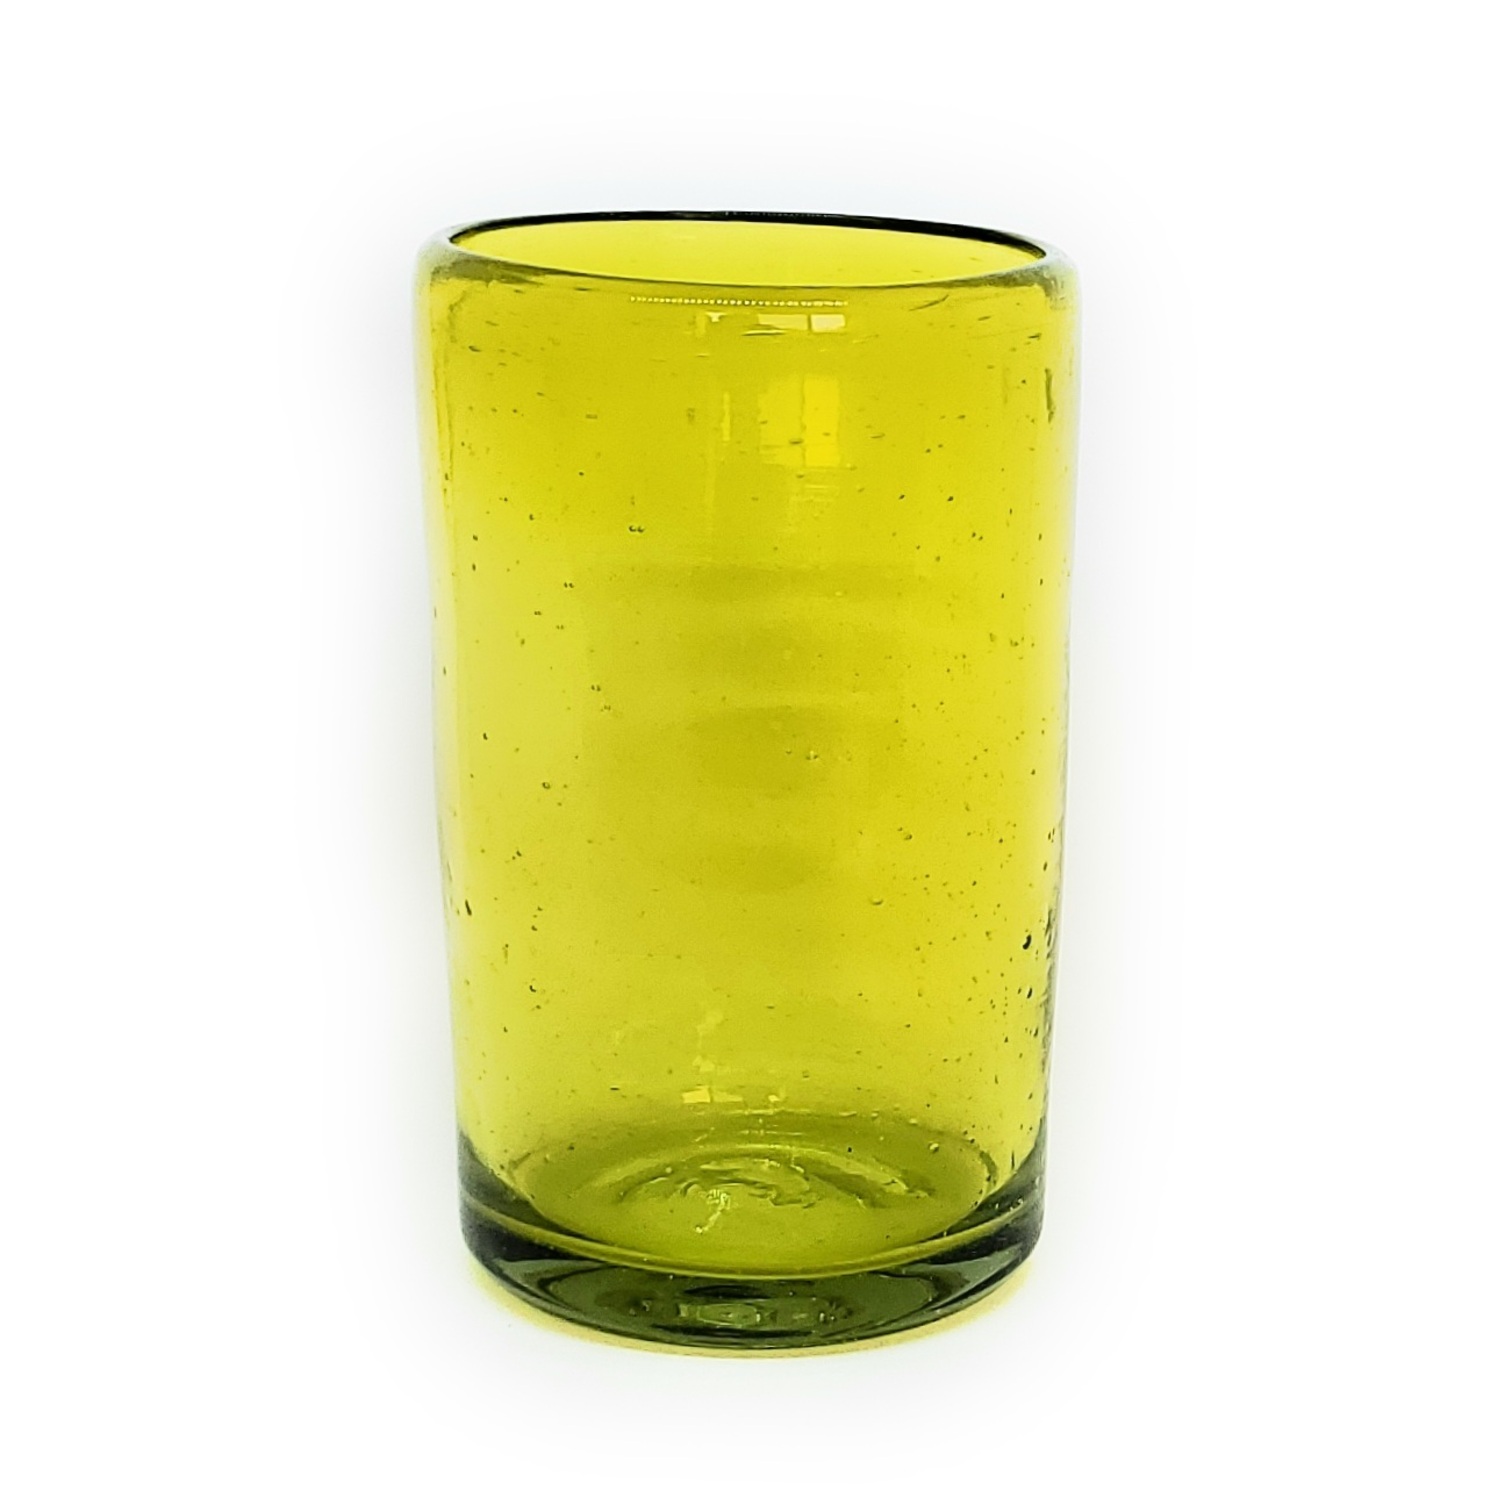 Colored Glassware / Solid Yellow 14 oz Drinking Glasses (set of 6) / These handcrafted glasses deliver a classic touch to your favorite drink.